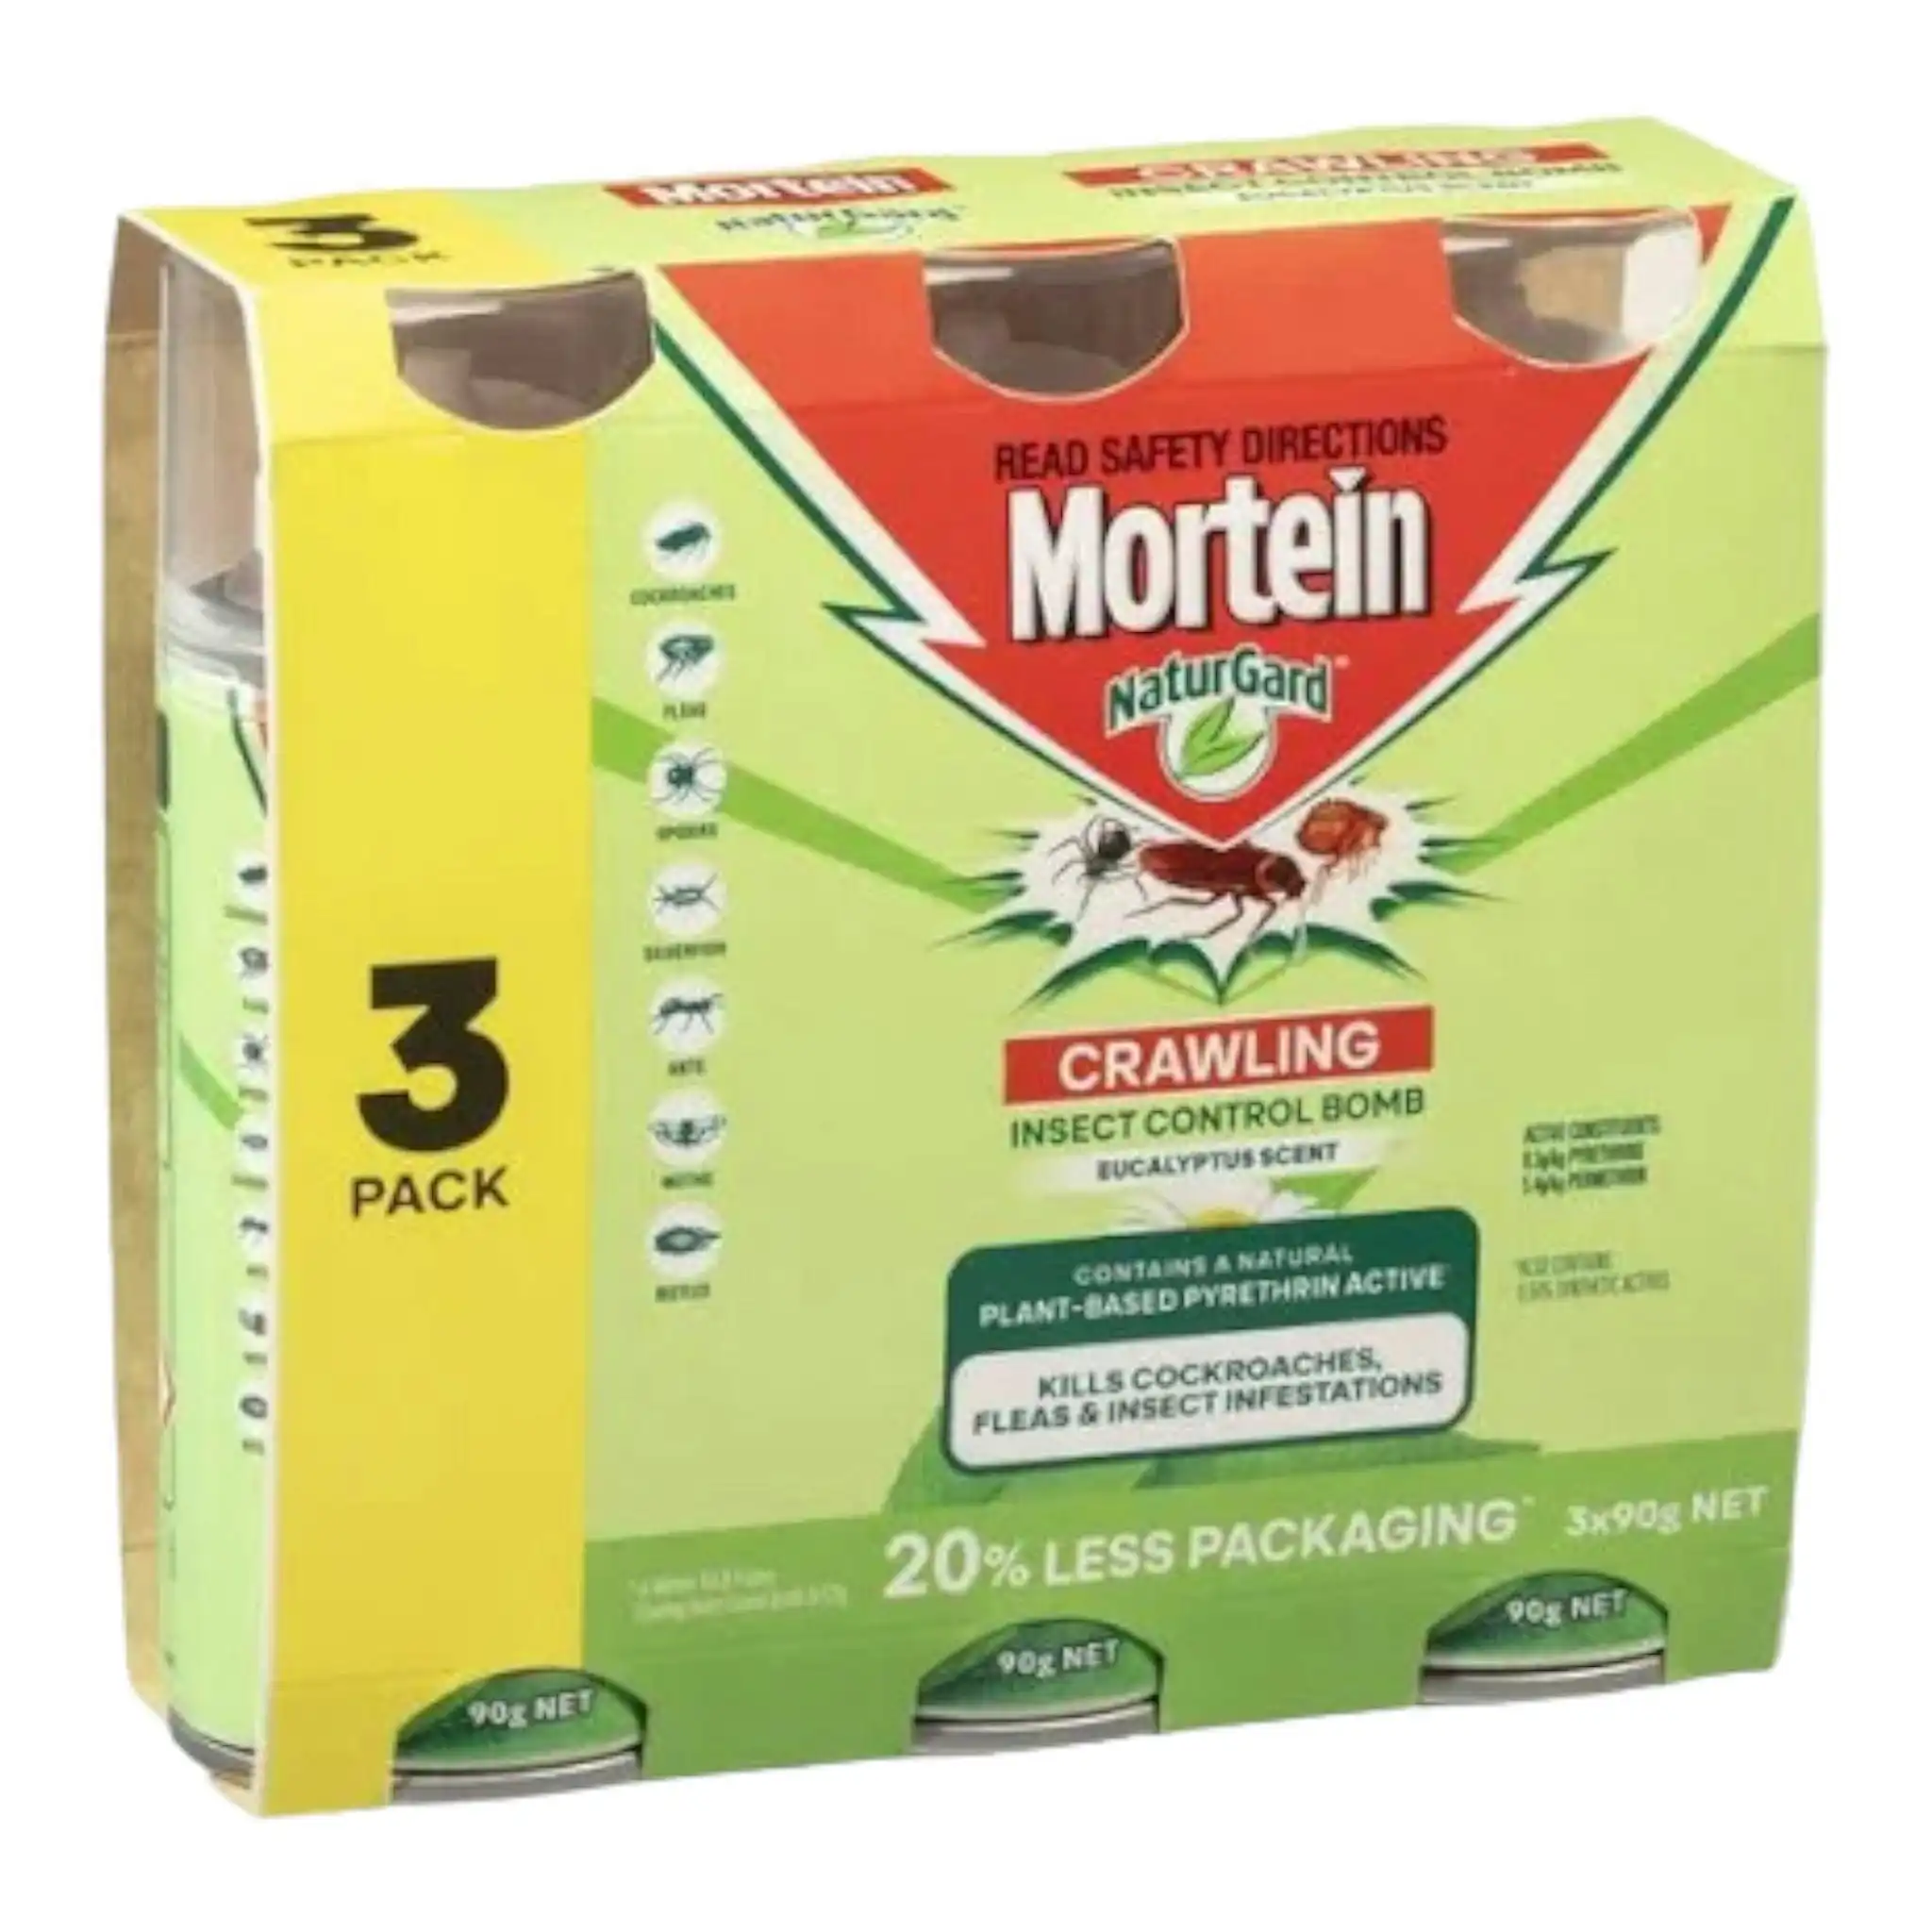 Mortein Naturgard Crawling Insect Control Bomb 3 Pack